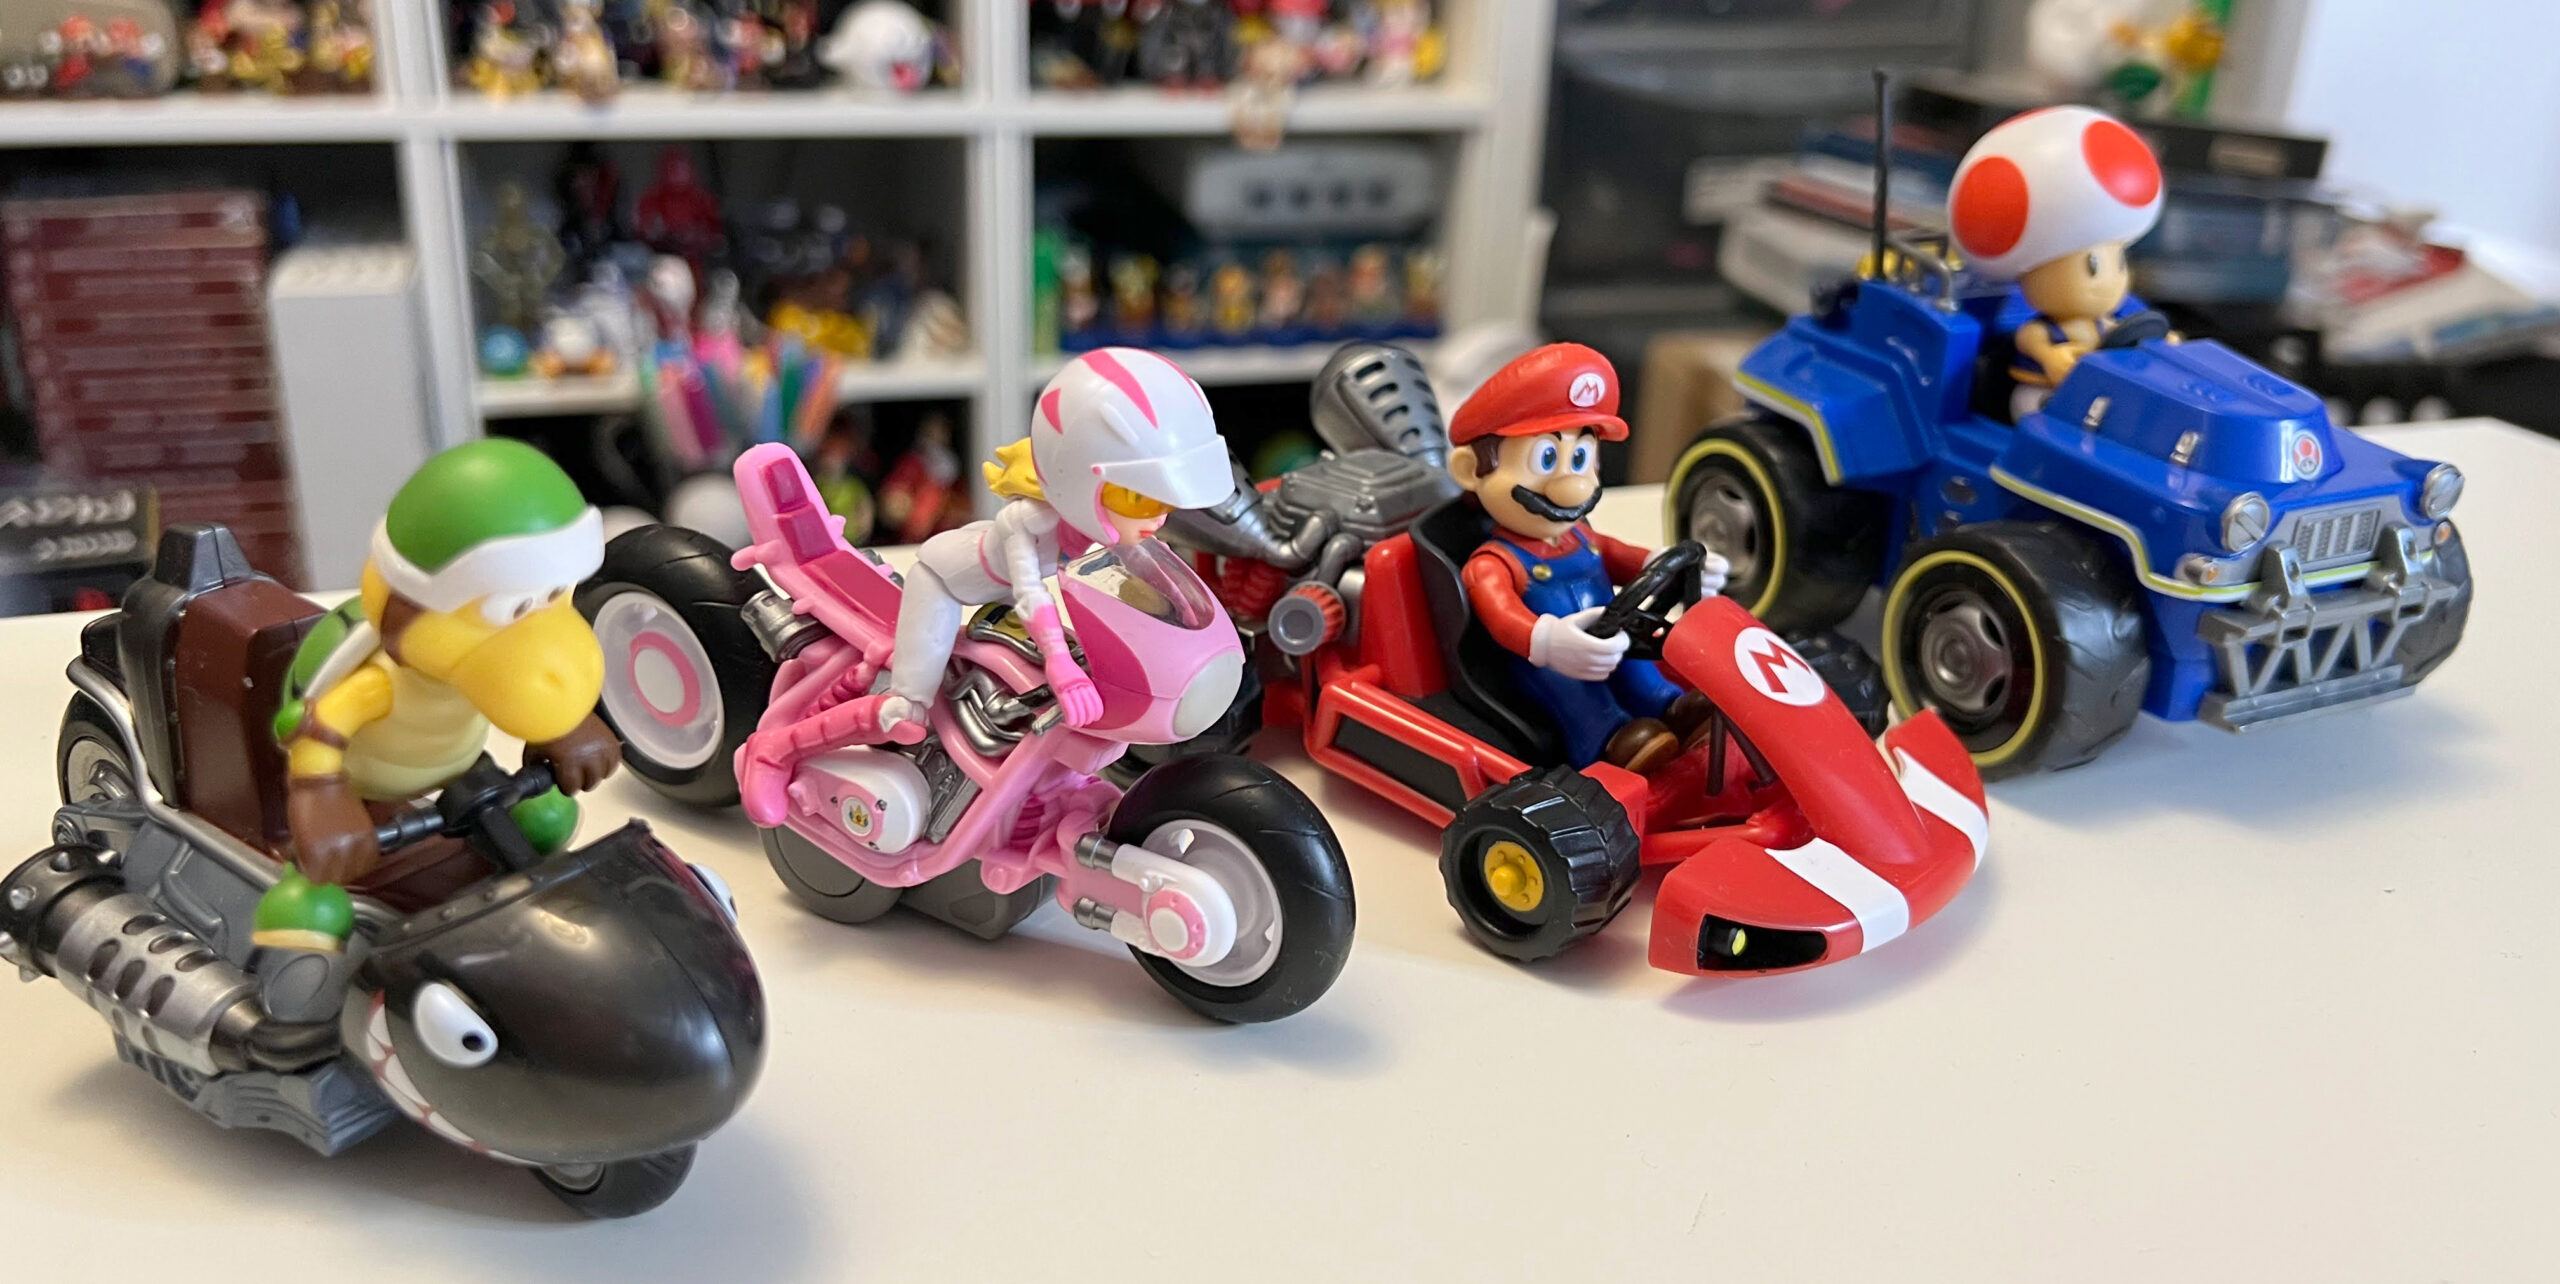 Review The Super Mario Bros Movie toys aren’t blowing smoke when it